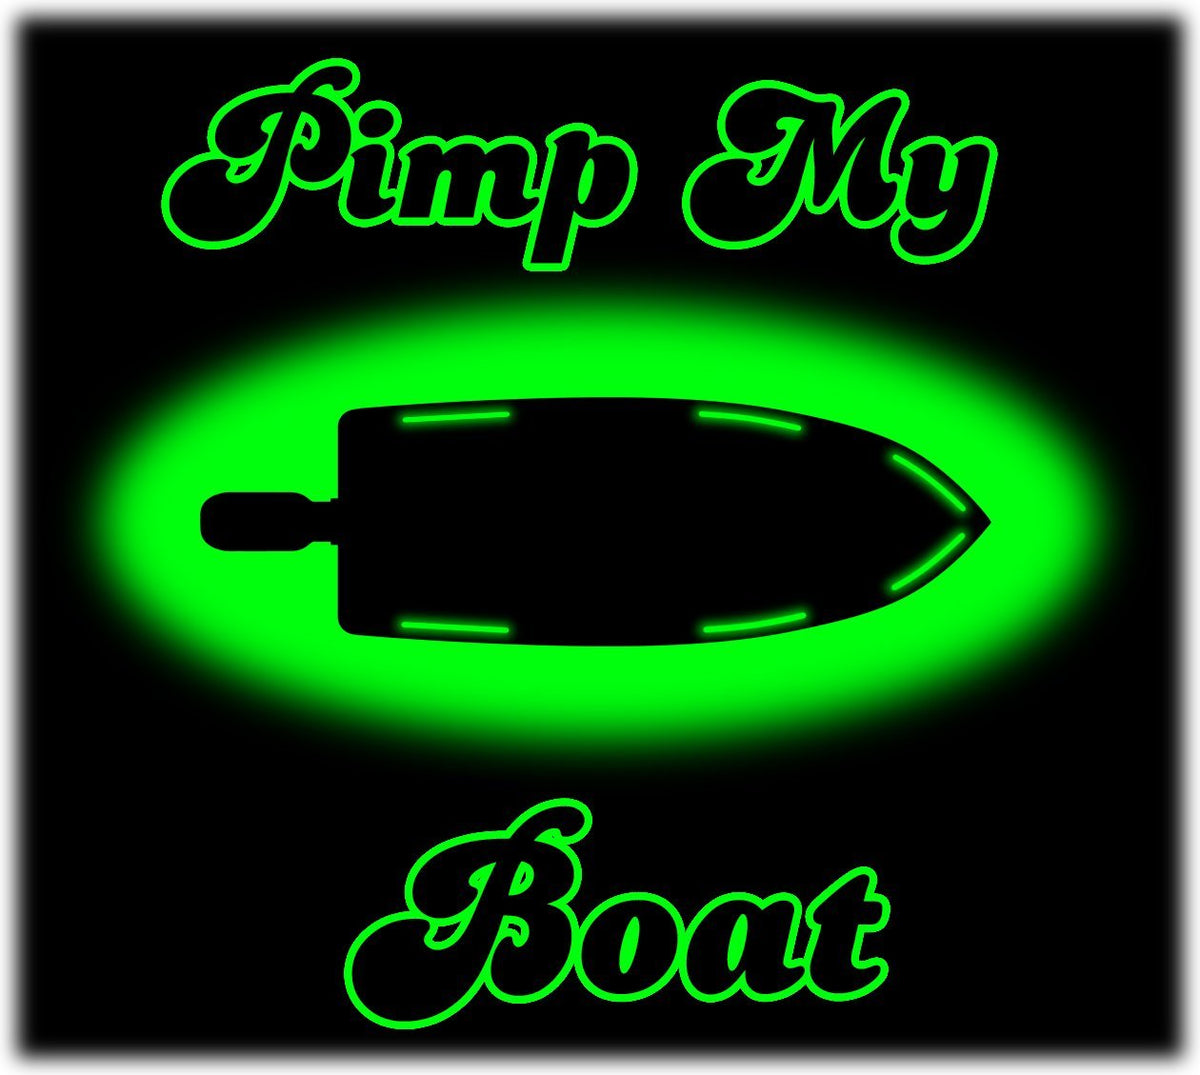 Pimp My Boat (Green) LED Boat Deck Lighting Kit DIY with Red &amp; Green Navigation Lights Pimp my Boat Green Blob Outdoors 